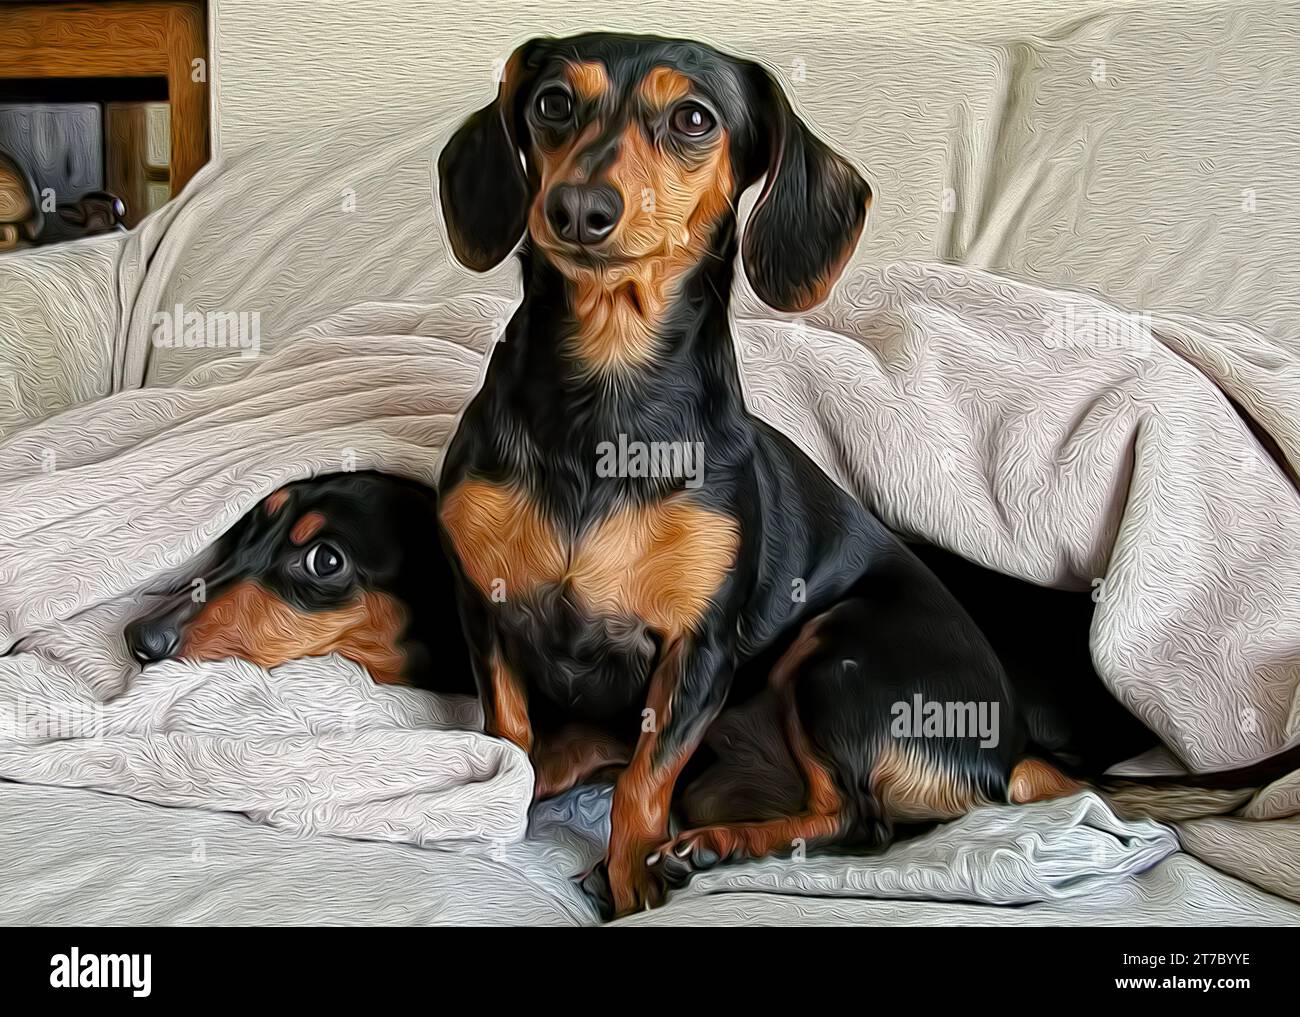 Digital Oil Painting of two short haired black and tan dachshund dogs on blanket Stock Photo